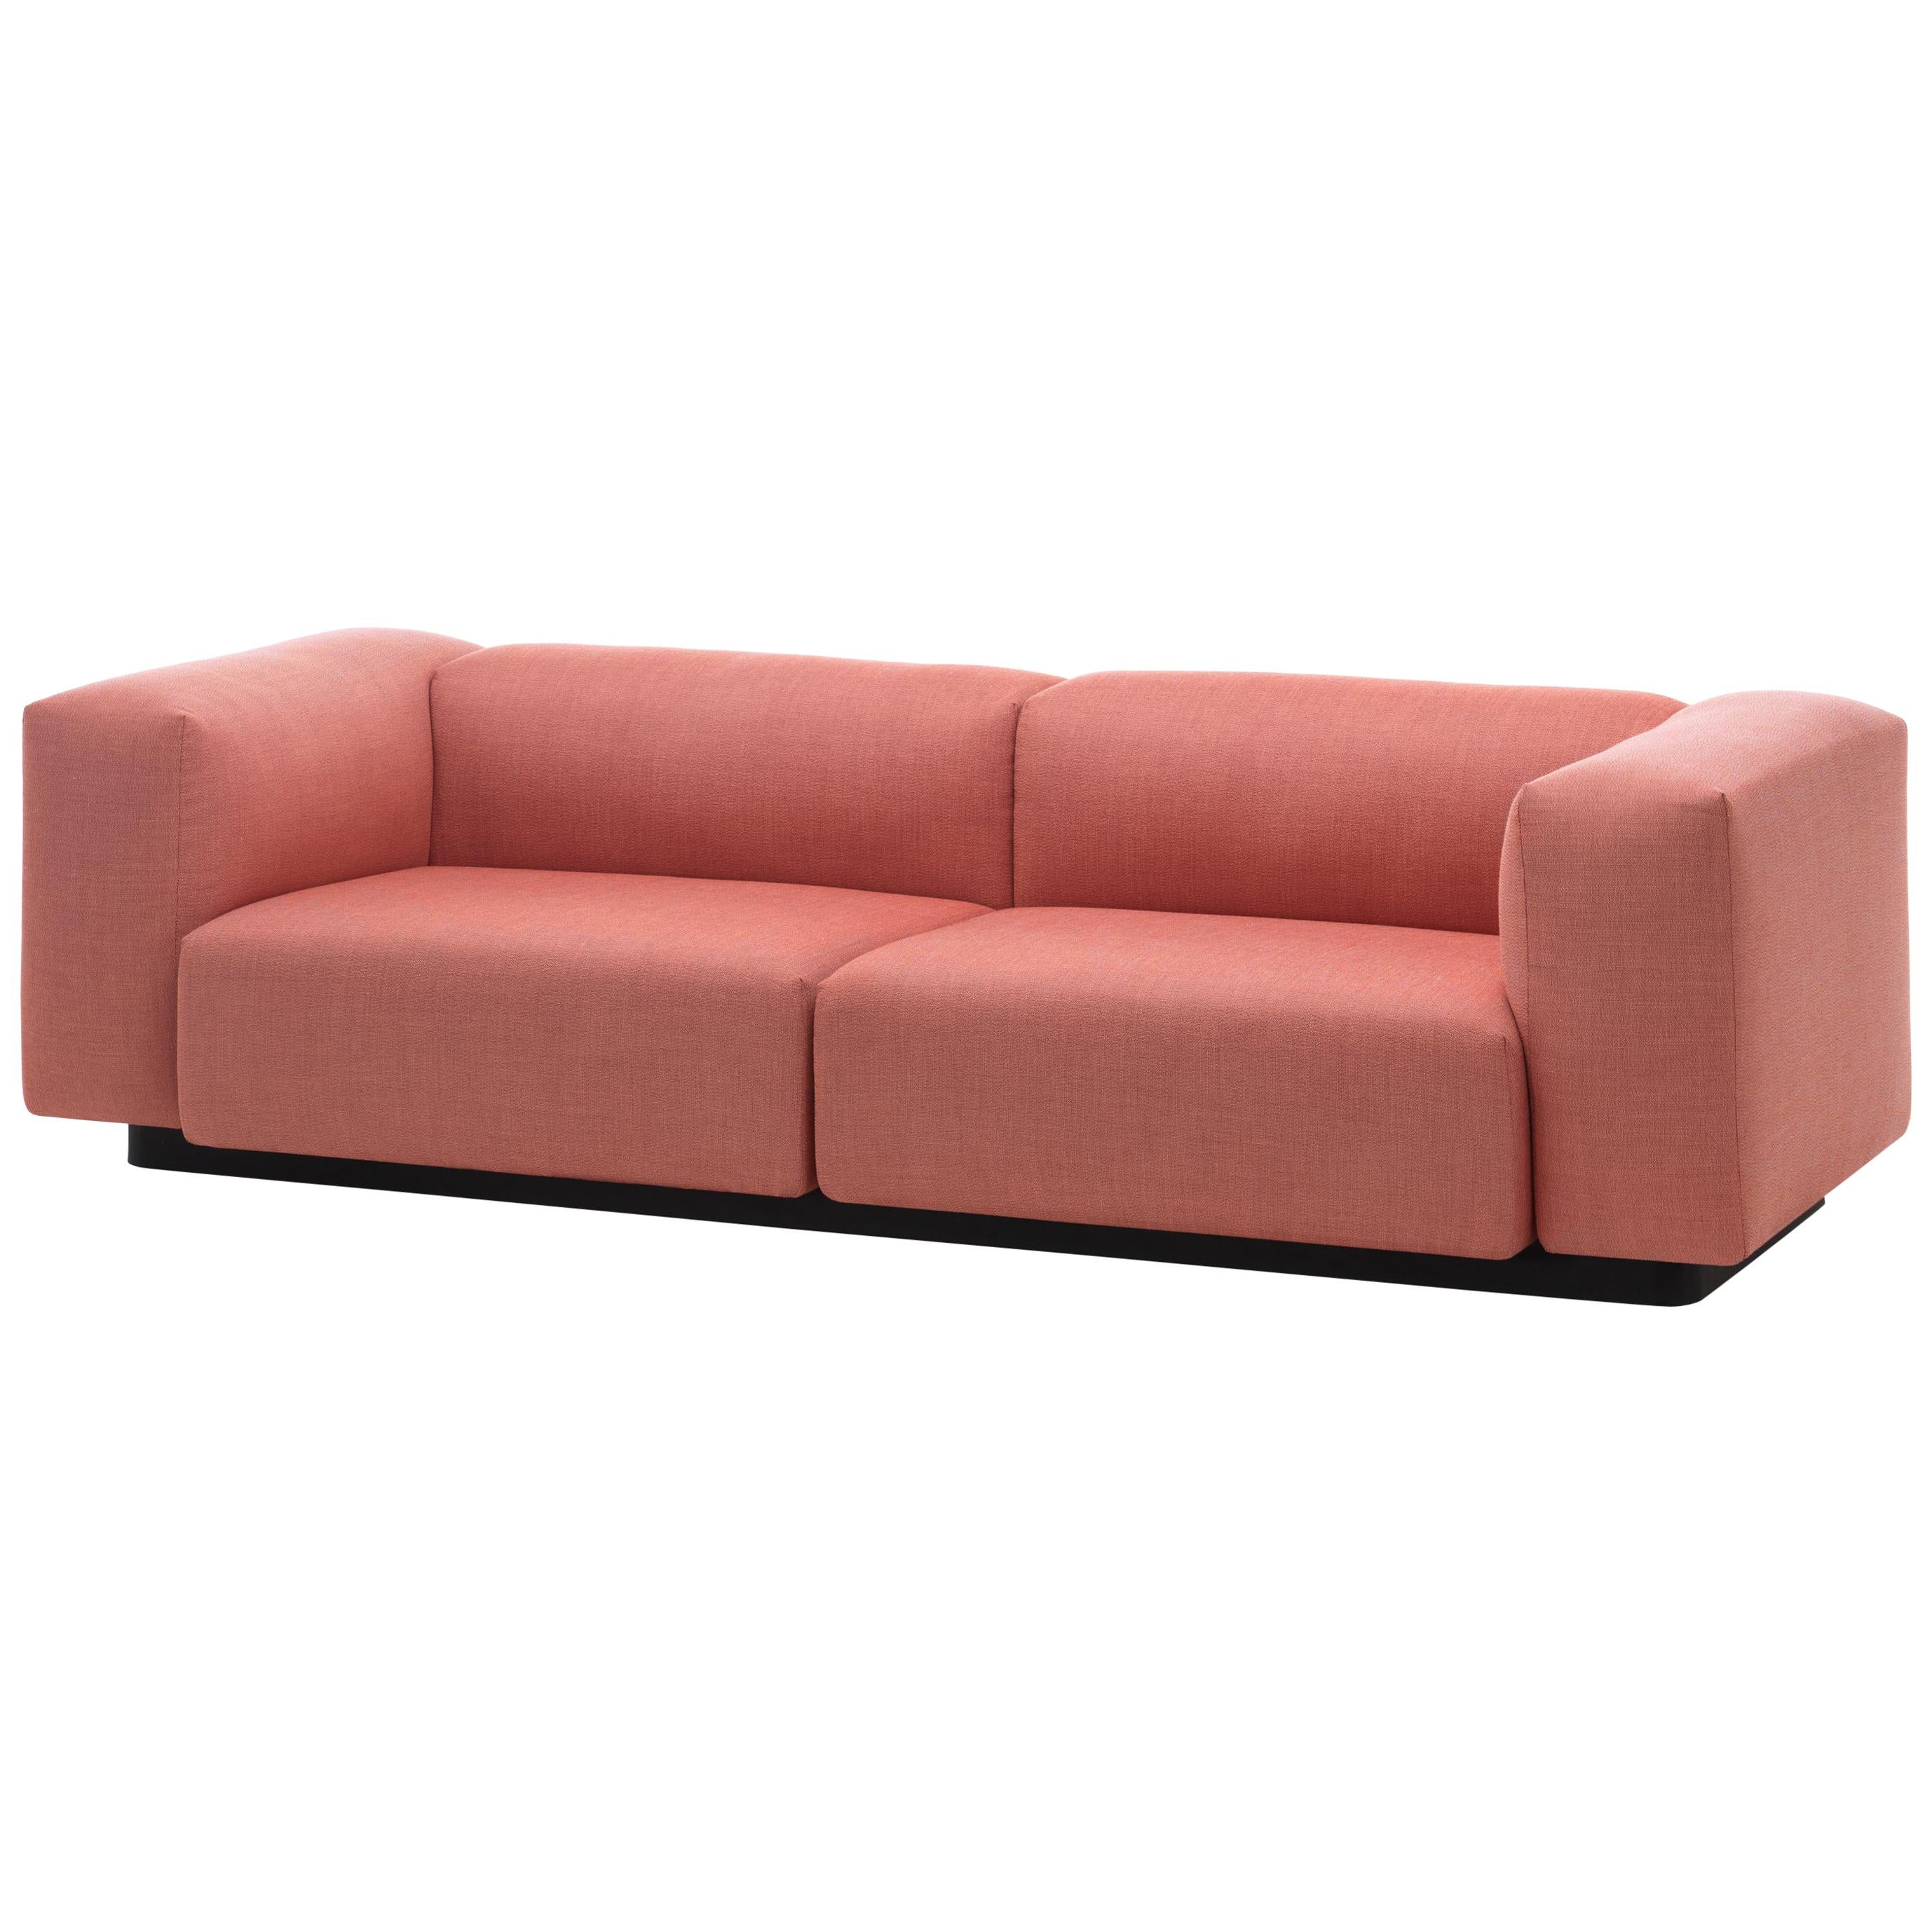 Vitra Soft Modular 2-Seat Sofa in Lilac Mello by Jasper Morrison, 1stdibs NY For Sale